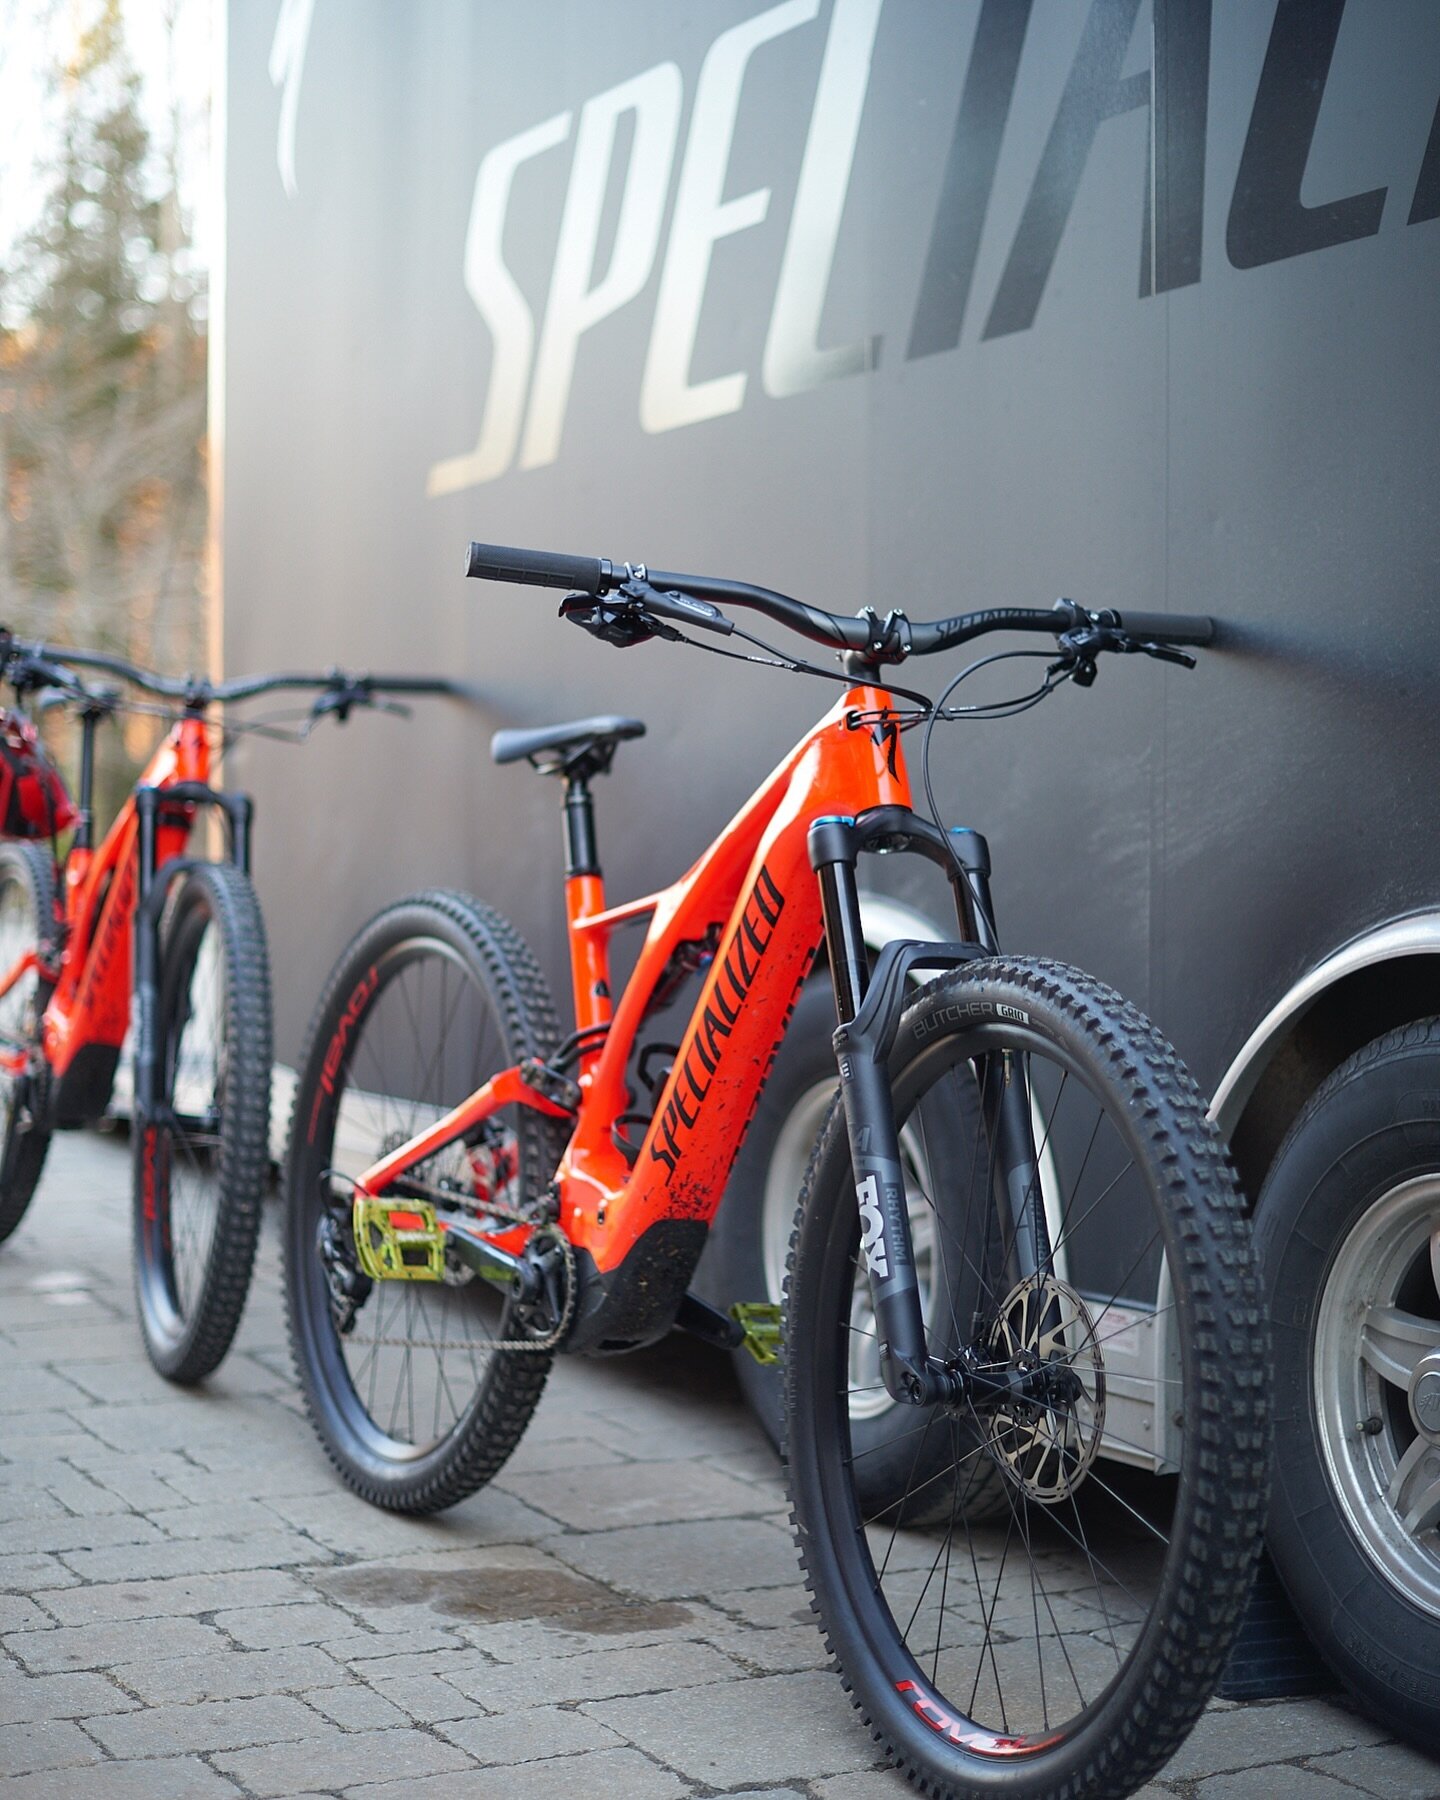 We refrain from frequent posts about our partners, valuing authenticity over promotional content. However, our collaboration with @iamspecialized has been truly special. Adam, Dave, and Joe have become integral parts of our family, and the genuine co